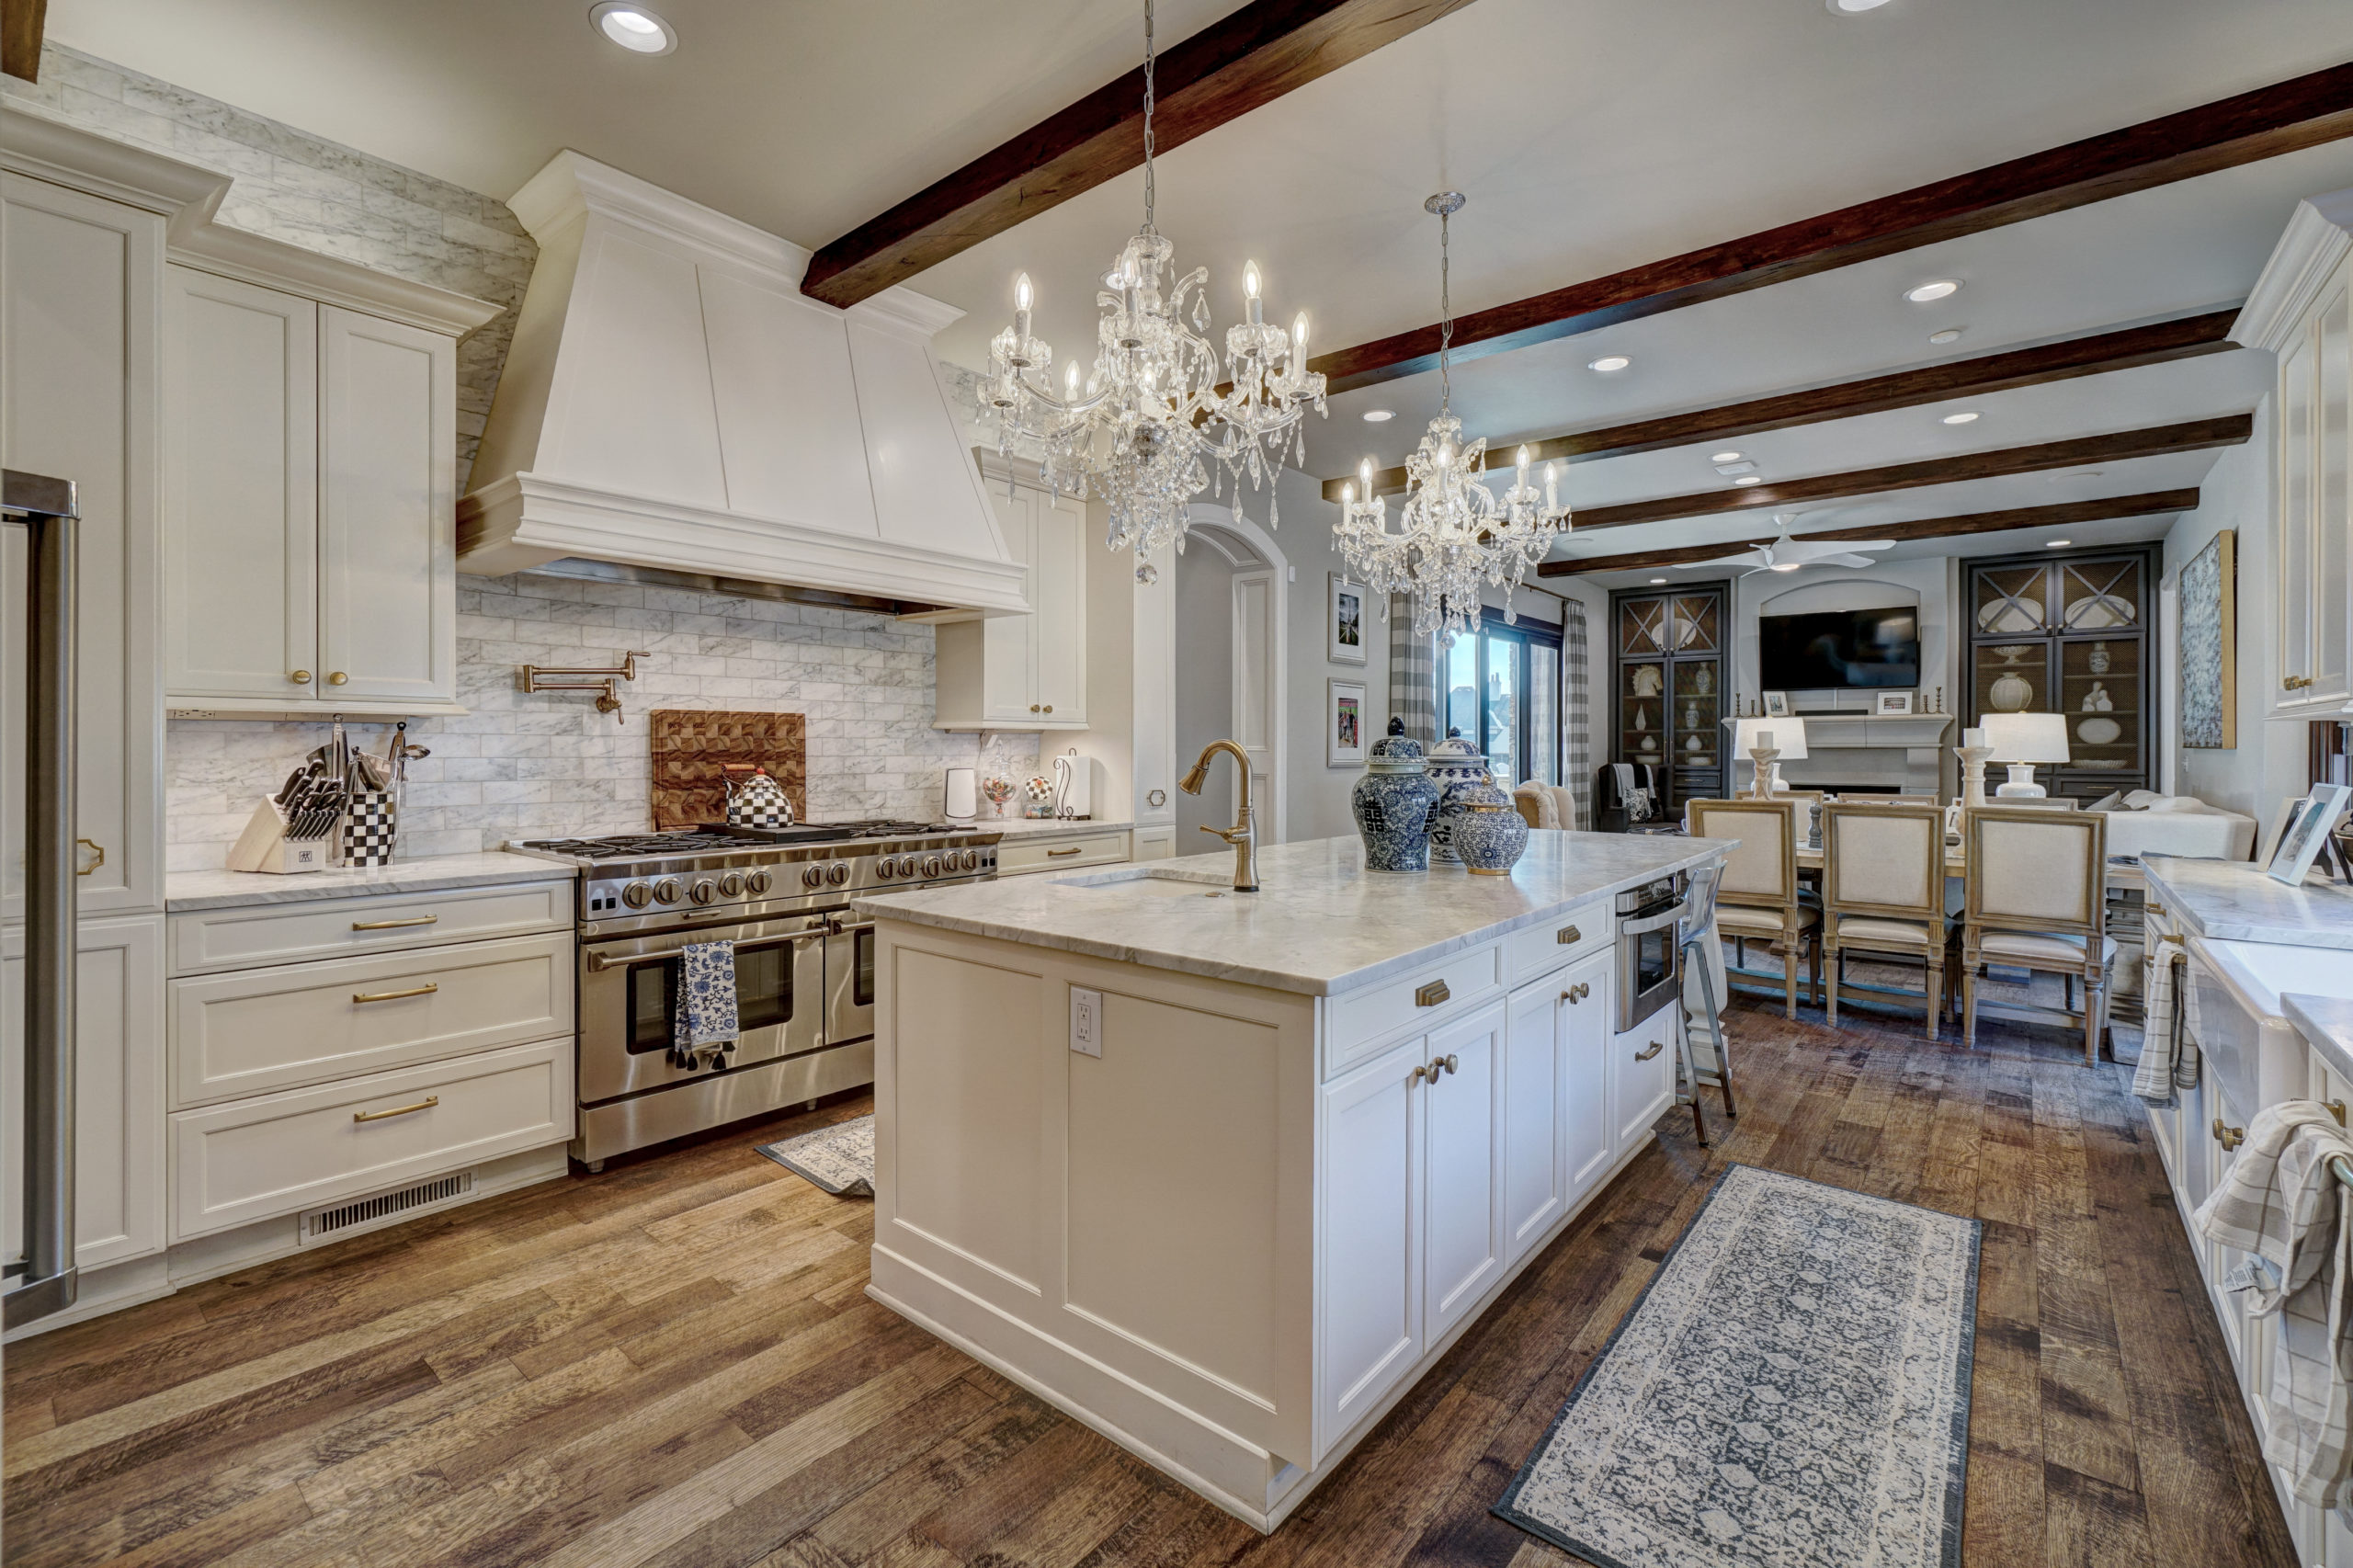 real estate photo of a large kitchen with white cabinets and wooden floors